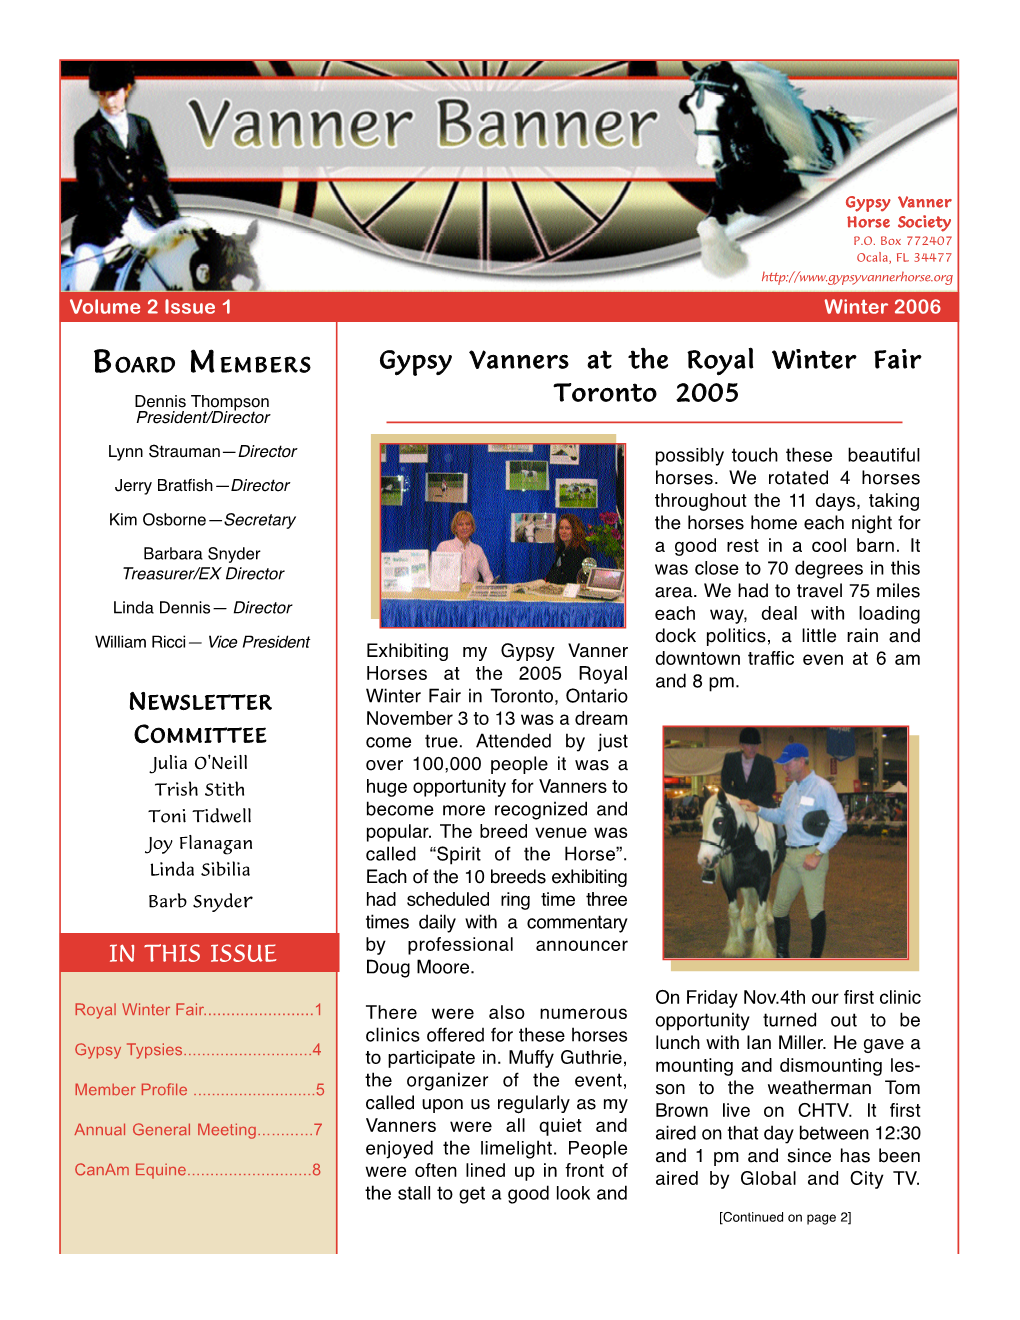 Gypsy Vanners at the Royal Winter Fair Toronto 2005 in THIS ISSUE